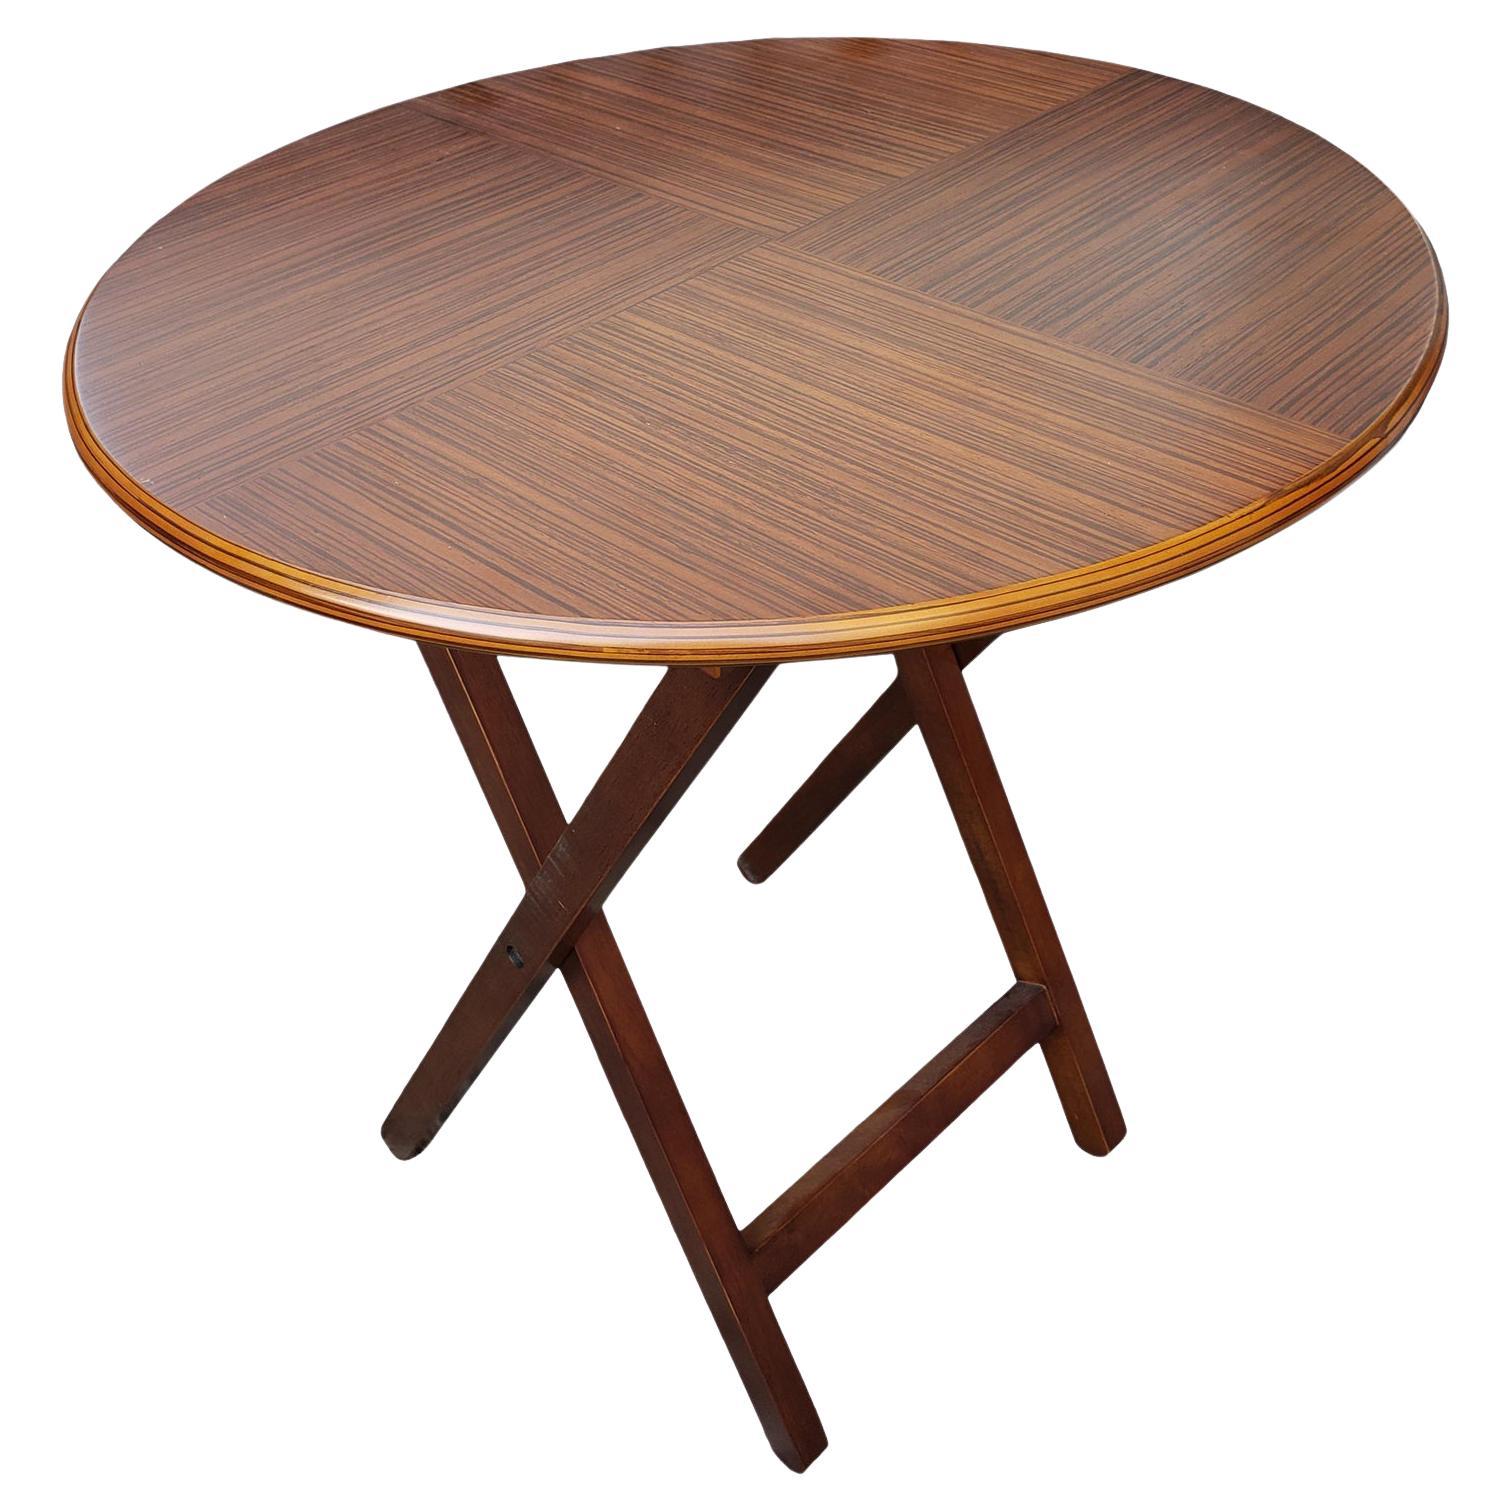 Zebra Wood  Book Matched Top Cross Legs Folding Table For Sale